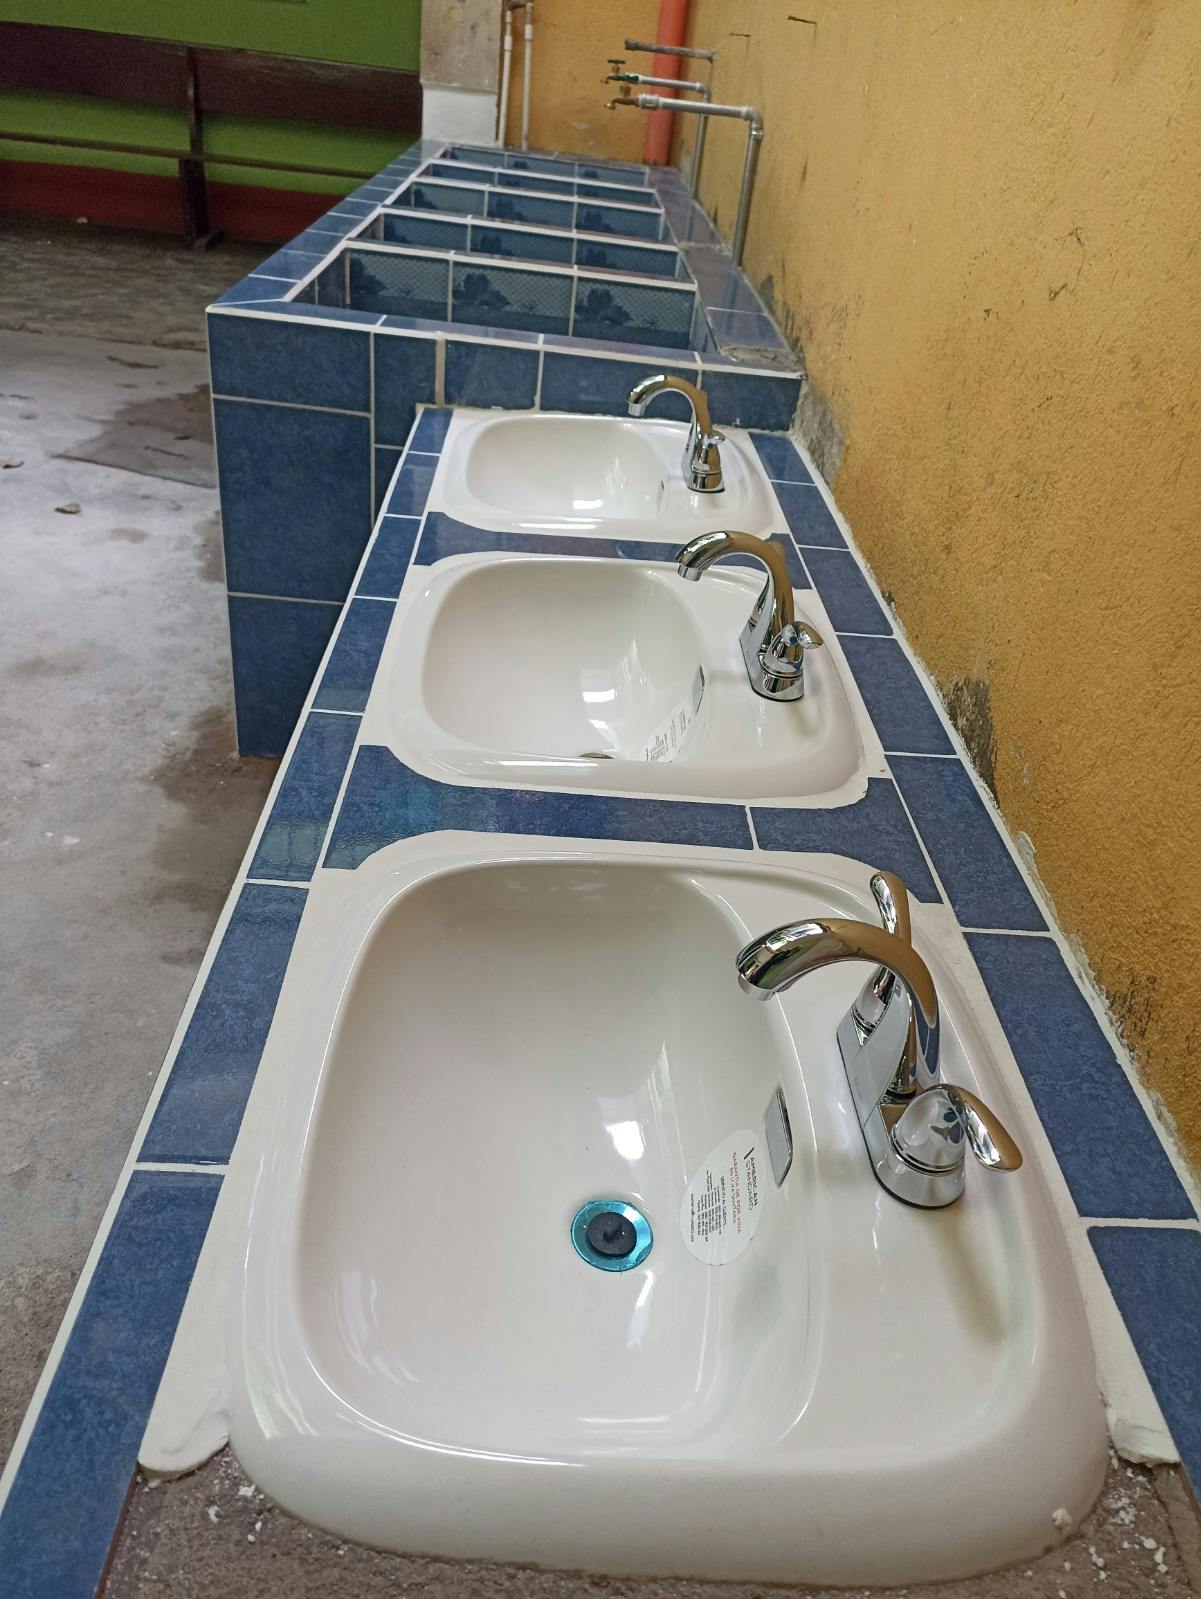 Completion of construction of sinks and cleaning area